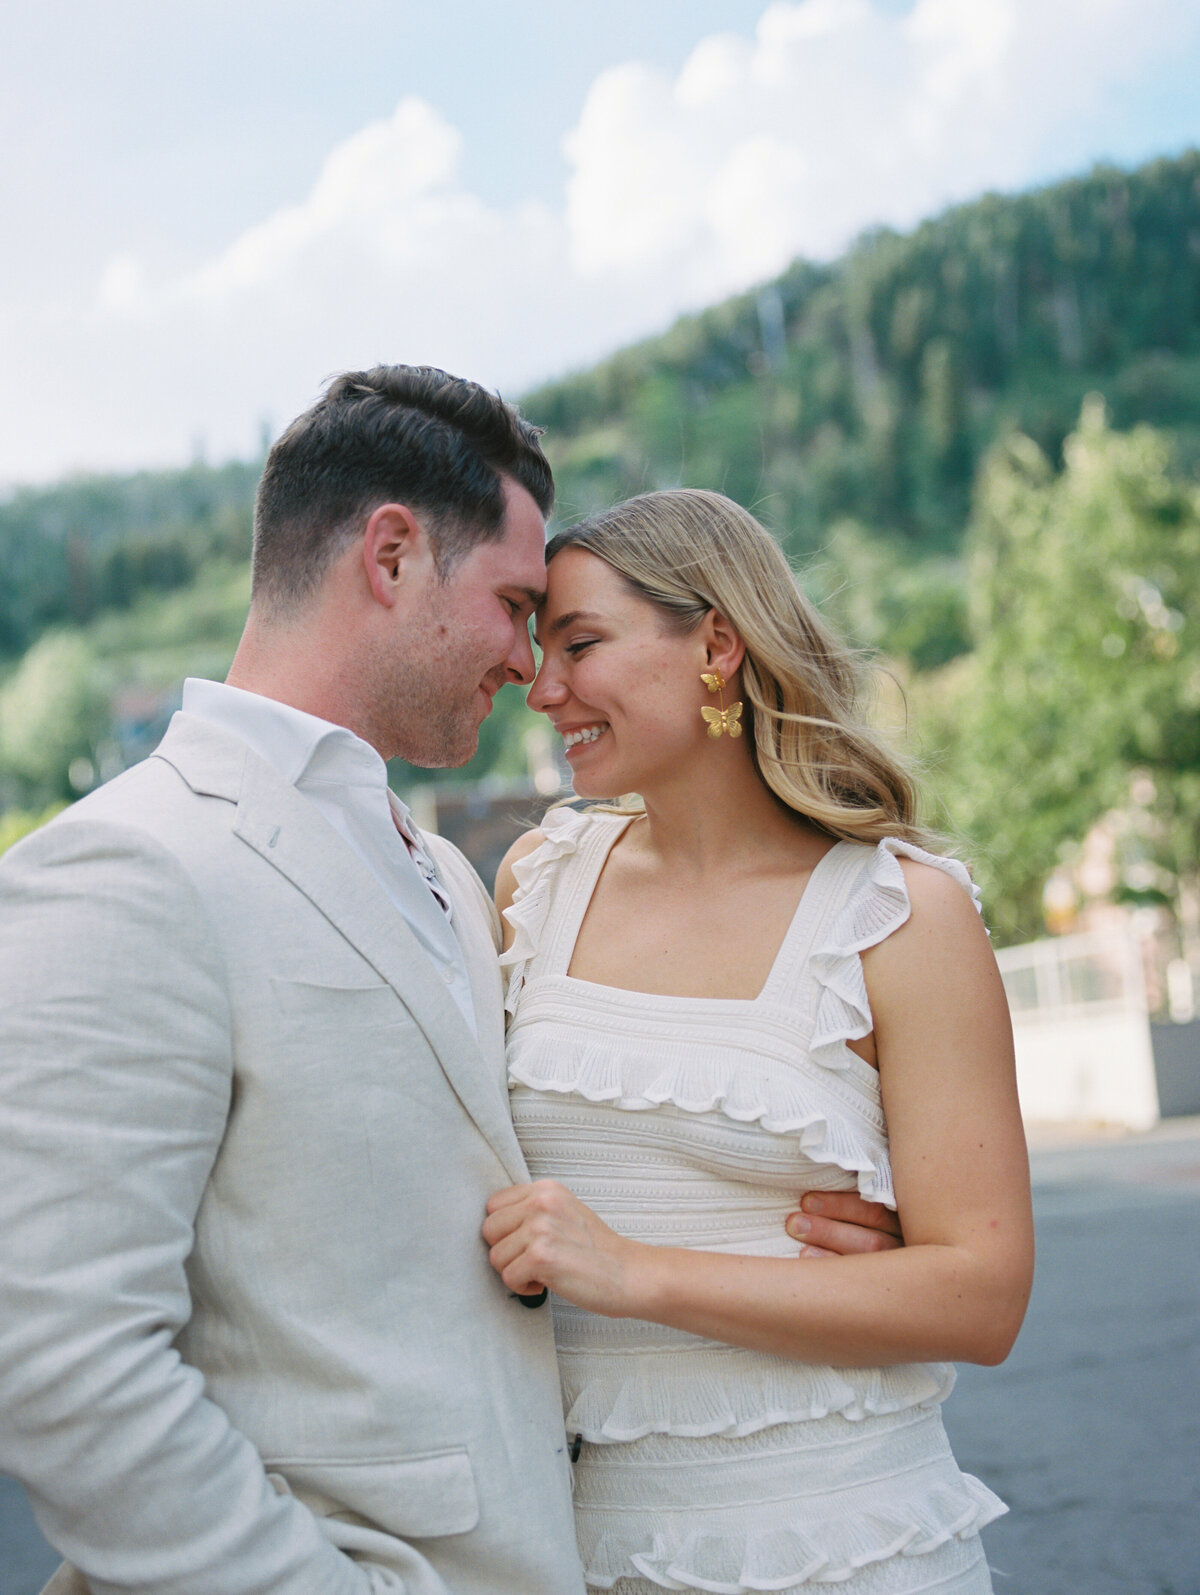 engaged couple embrace in downtown park city